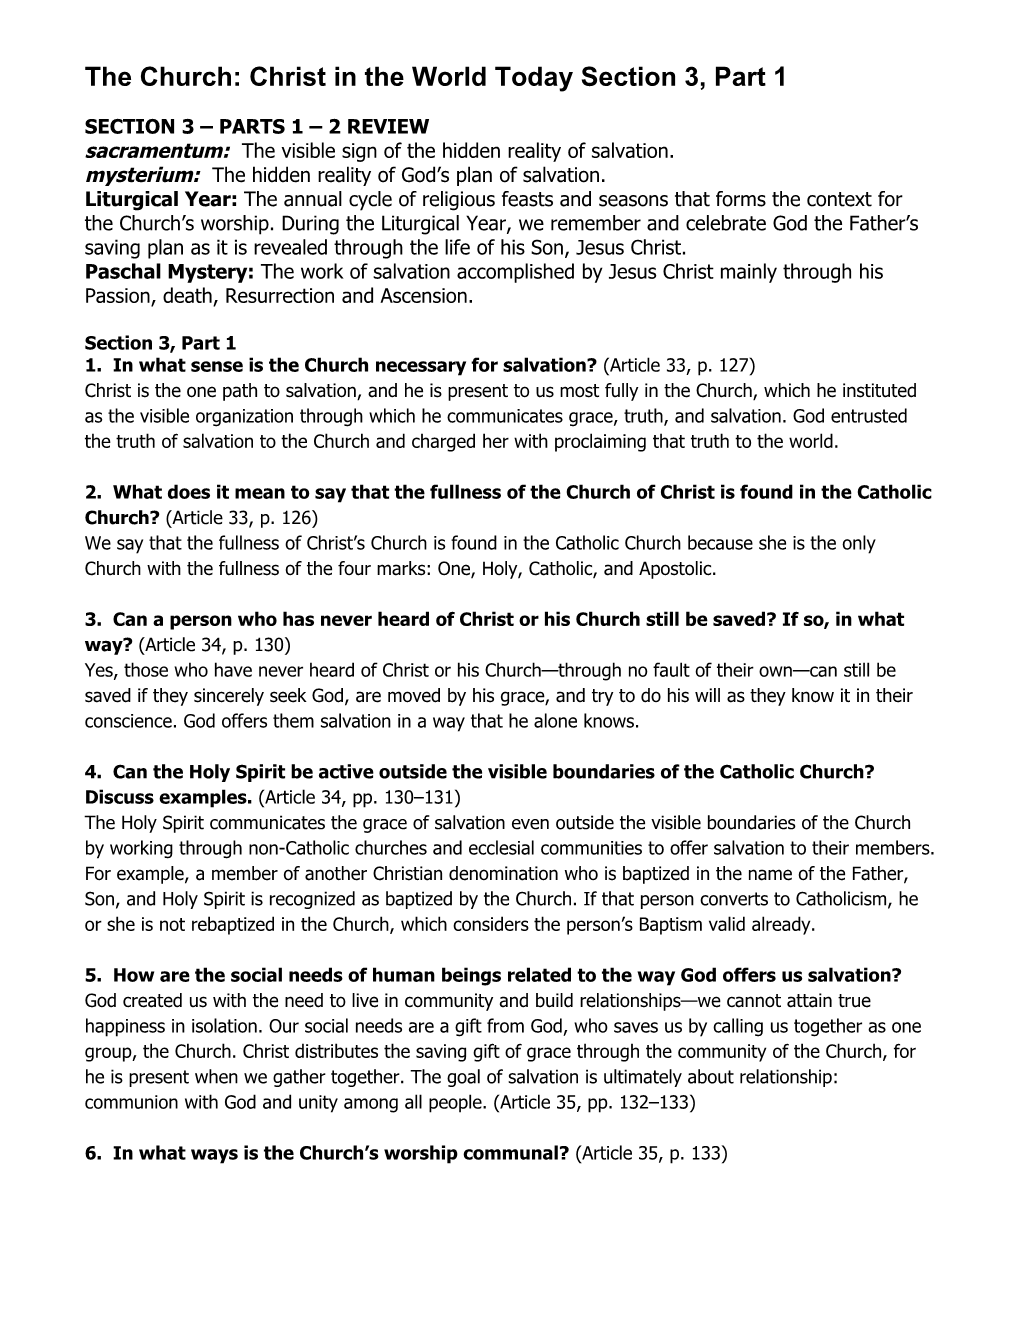 The Church Review Questions Answer Key Page 3